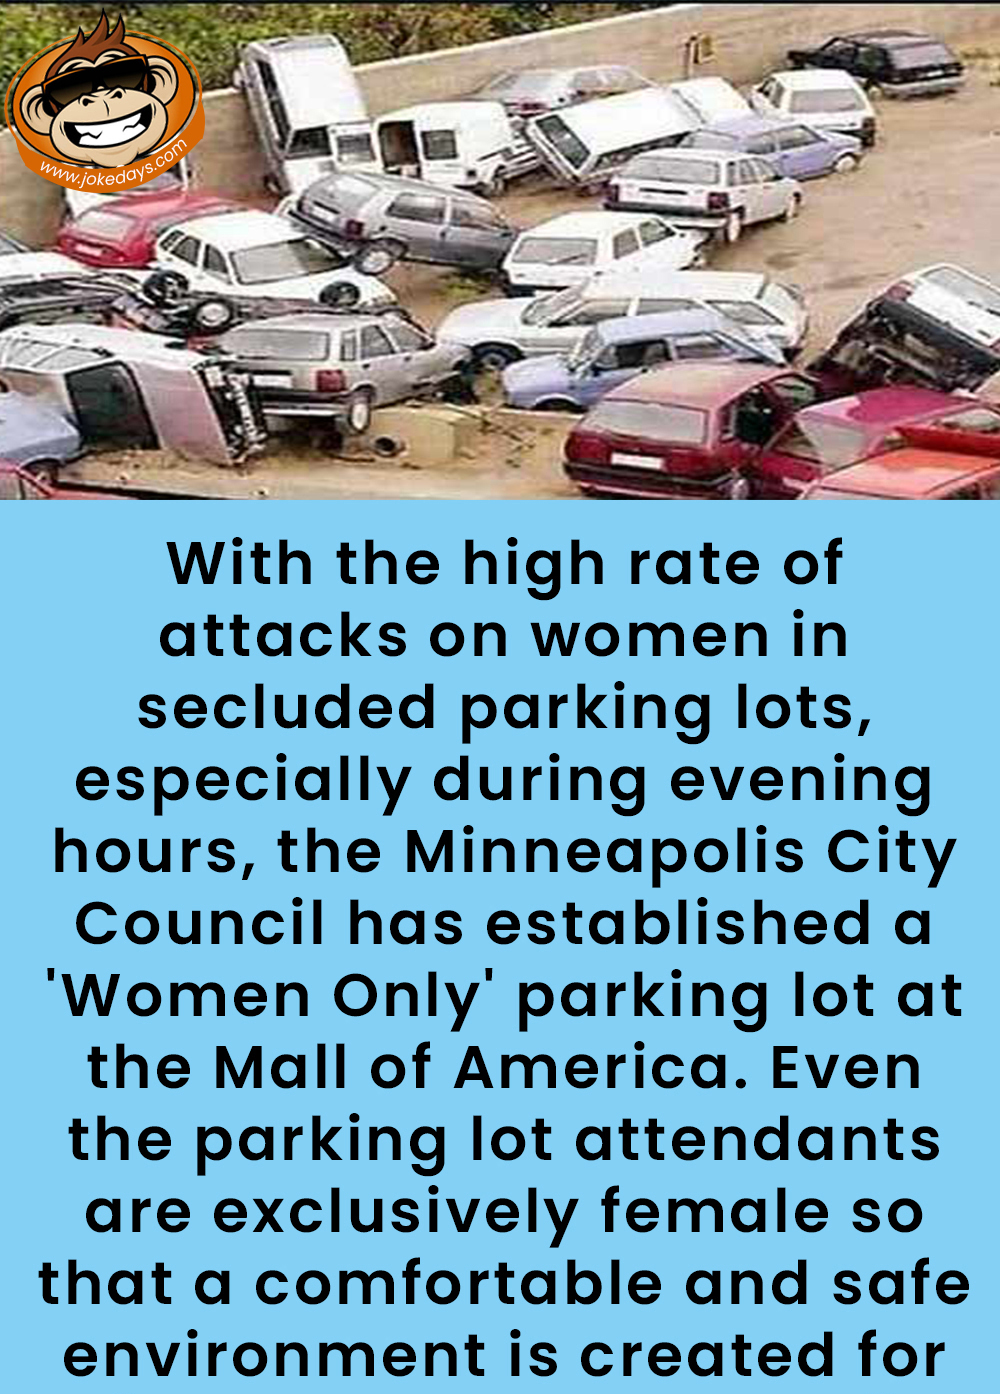 “Women Only” Parking